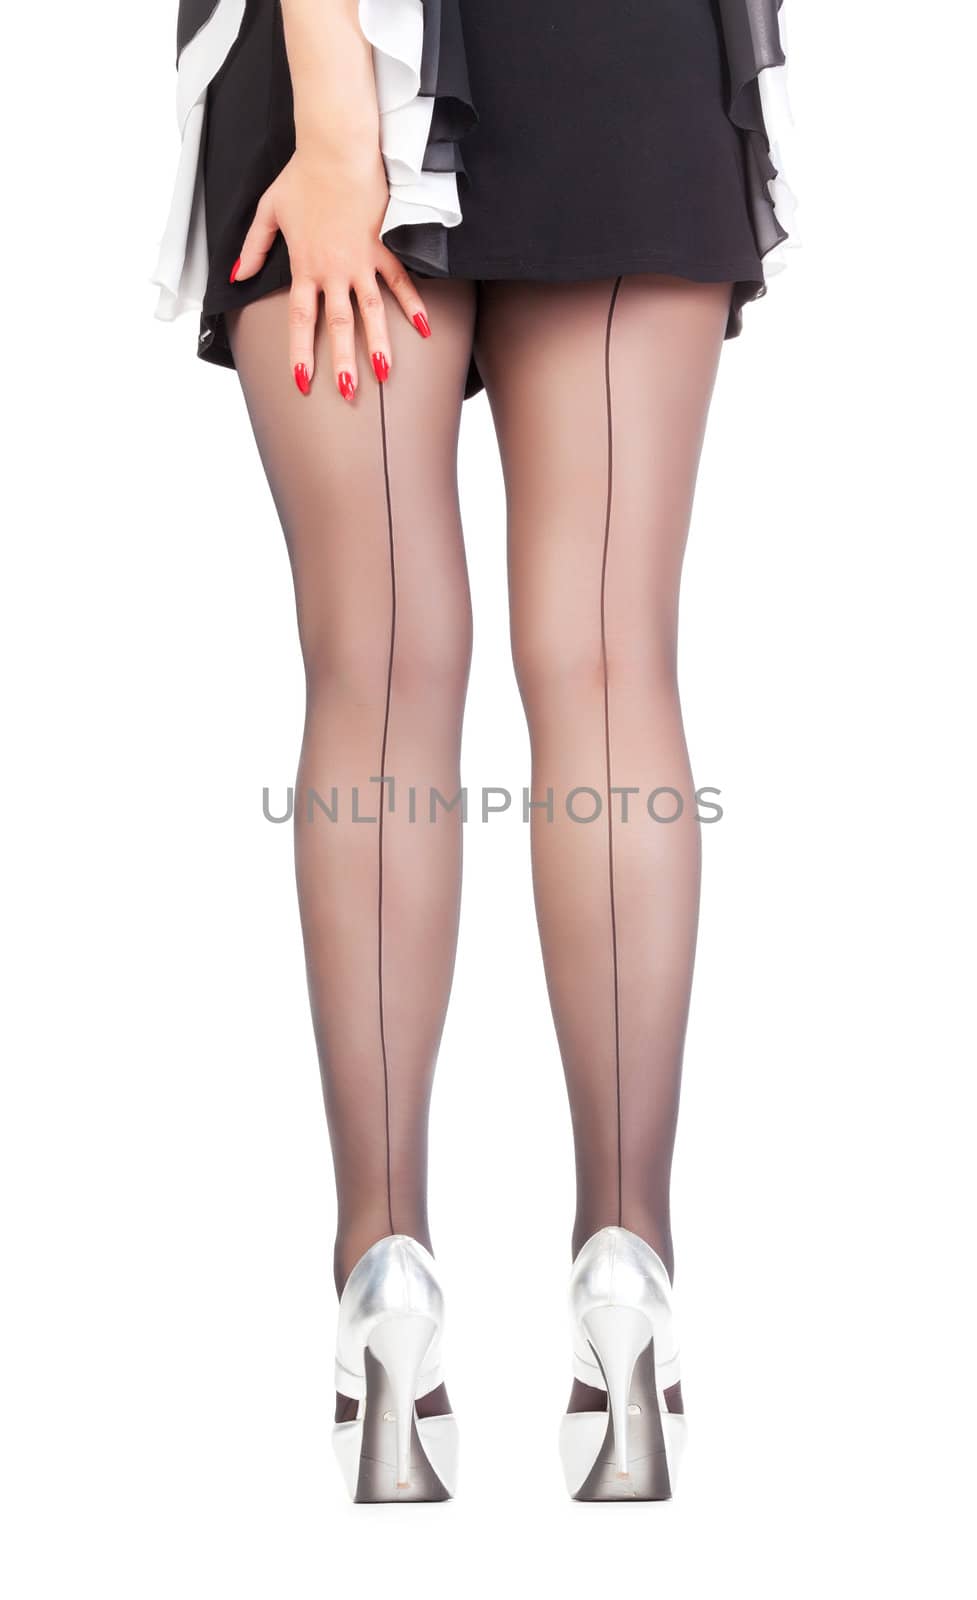 Conceptual cropped view image of the sexy stylish legs of a female wearing black sheer stockings and fashionable stilettos